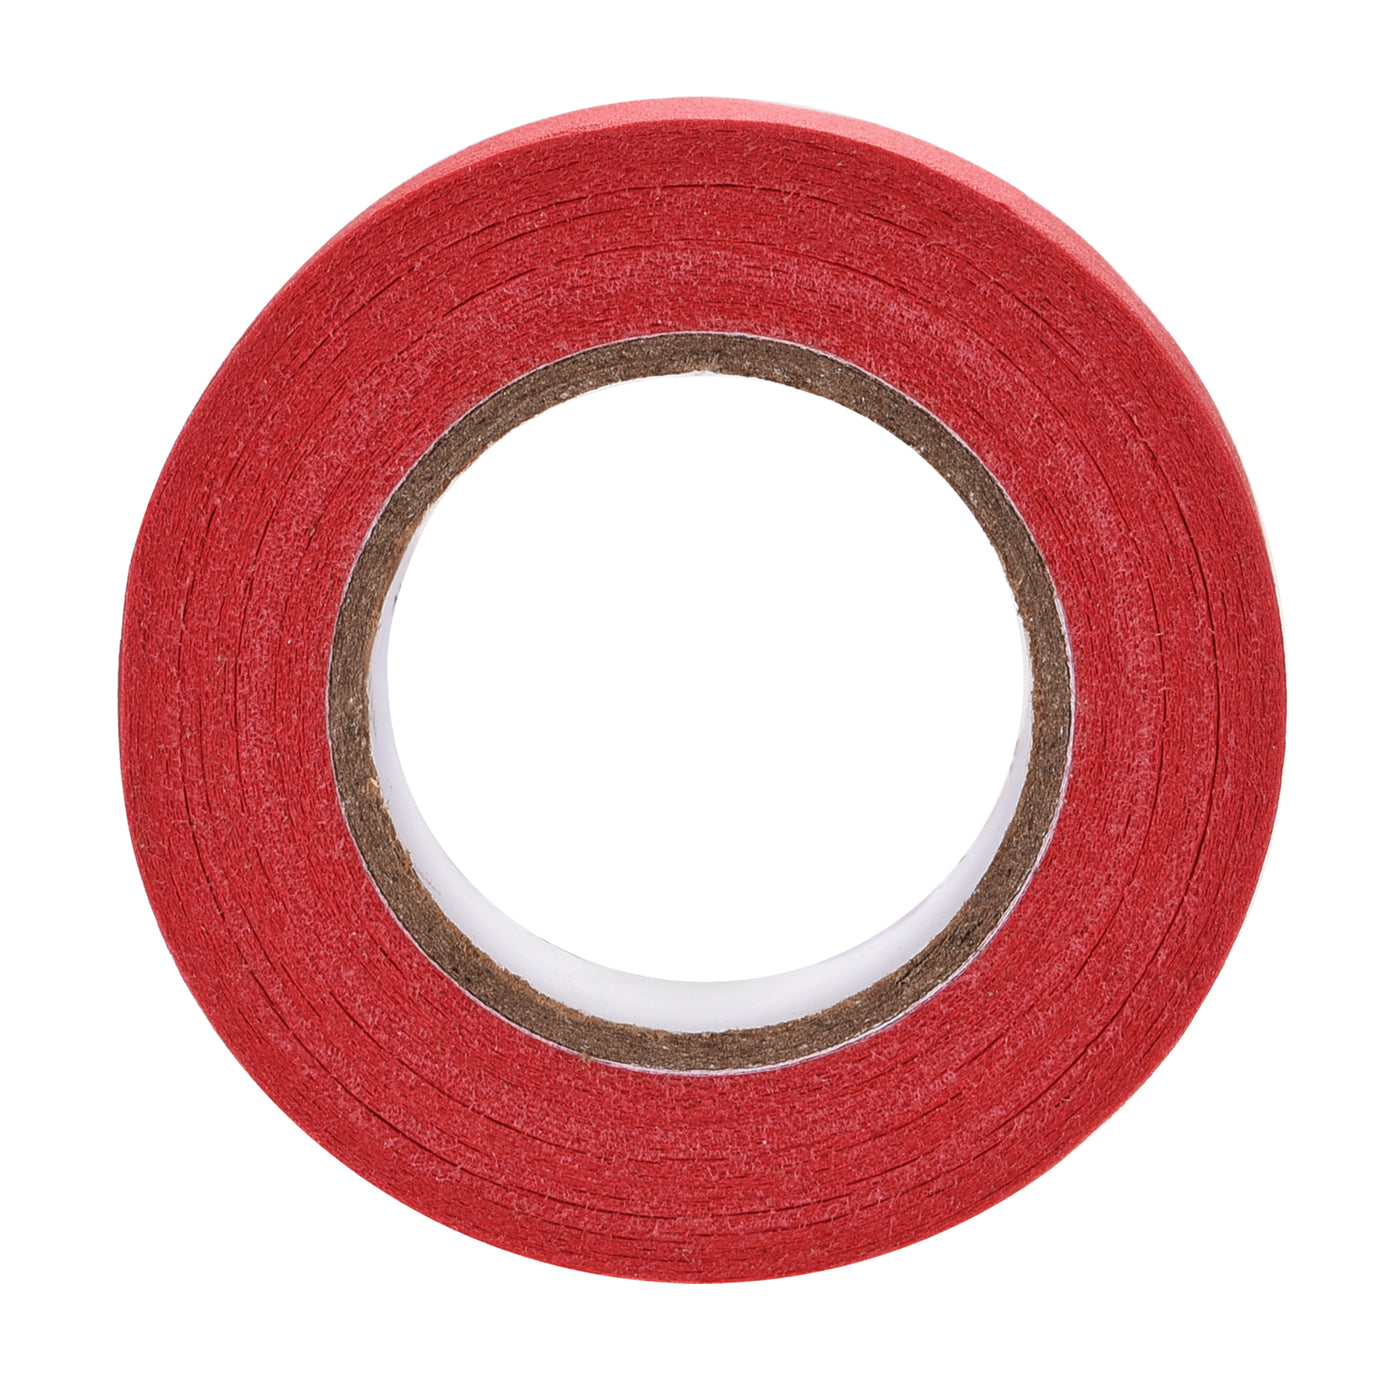 uxcell Uxcell 6Pcs 25mm 1 inch Wide 20m 21 Yards Masking Tape Painters Tape Rolls Red